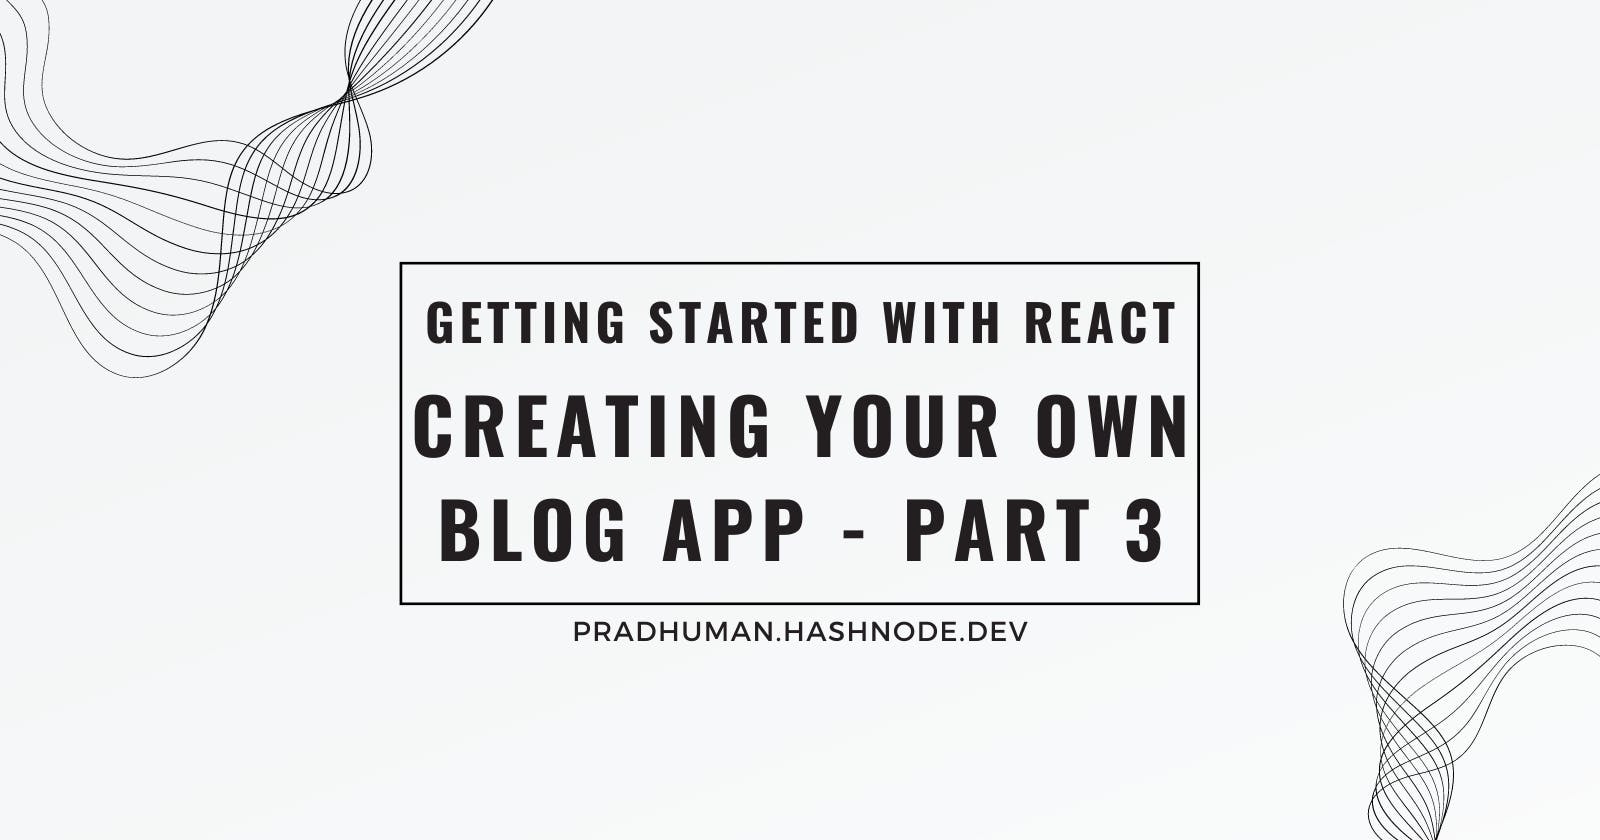 Getting Started with React: Creating Your Own Blog App - Part 3